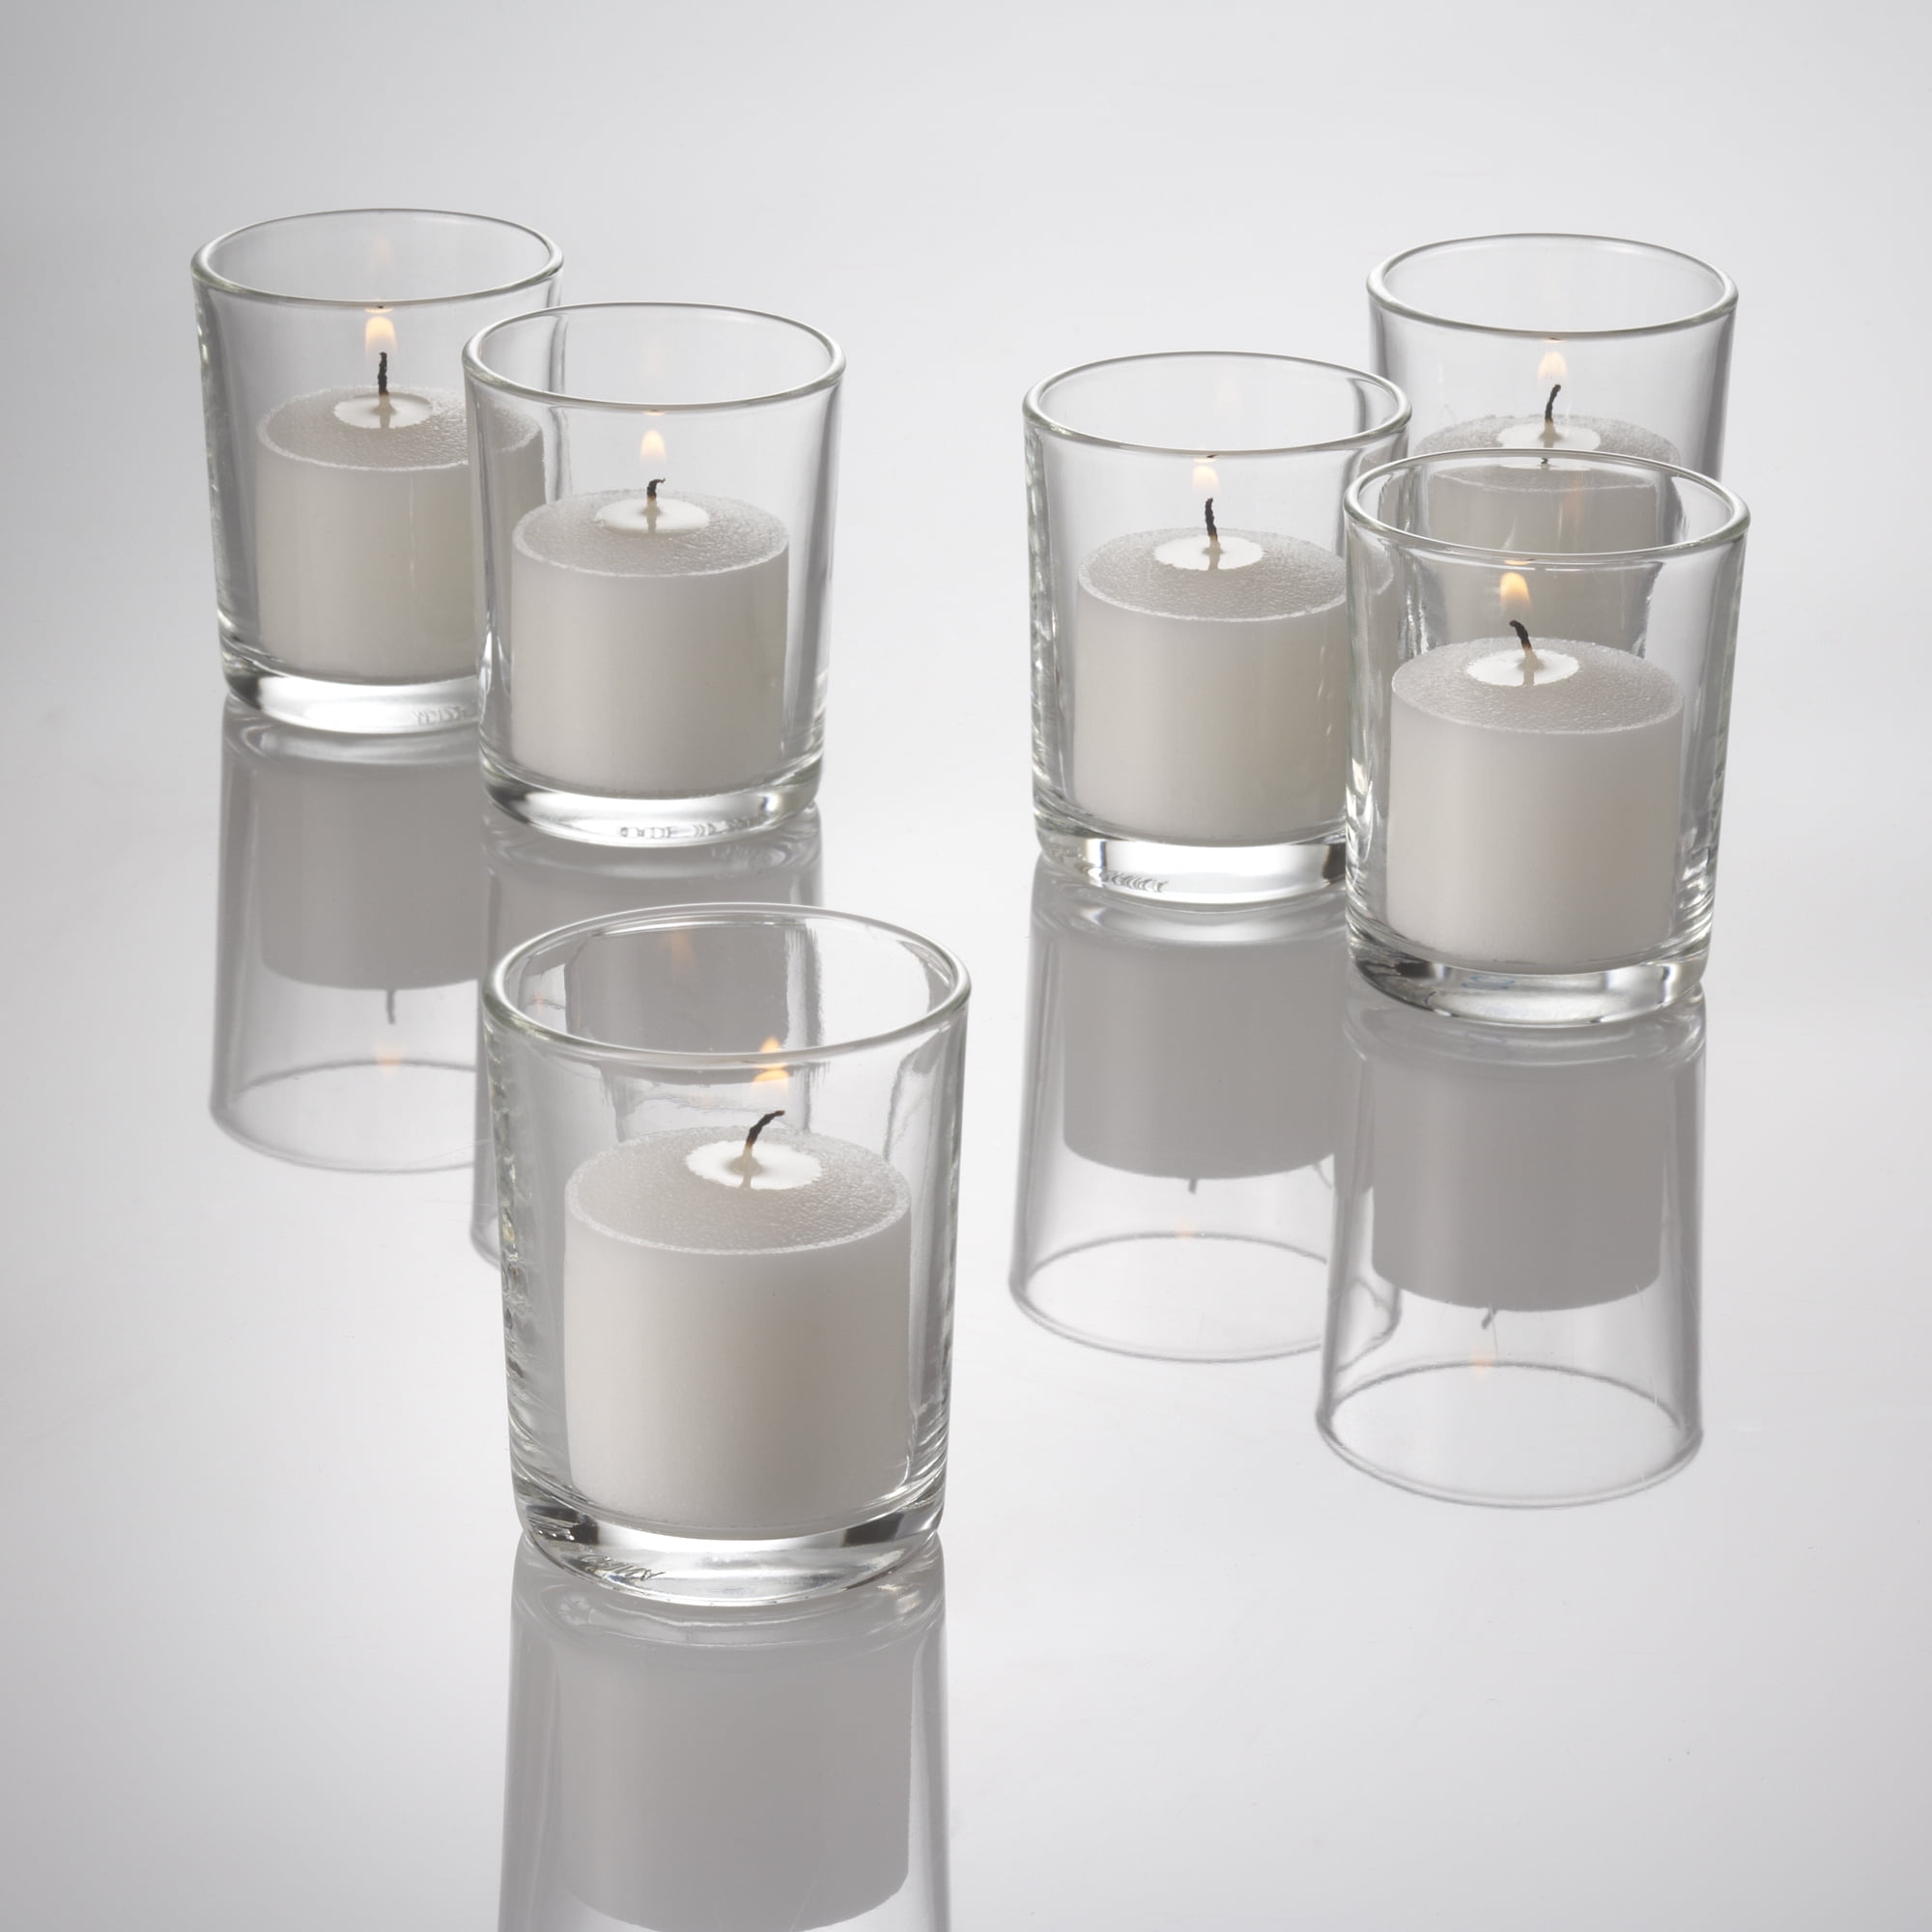 Eastland Votive Candle Holders: The Clear Choice For Setting The Perfect Mood